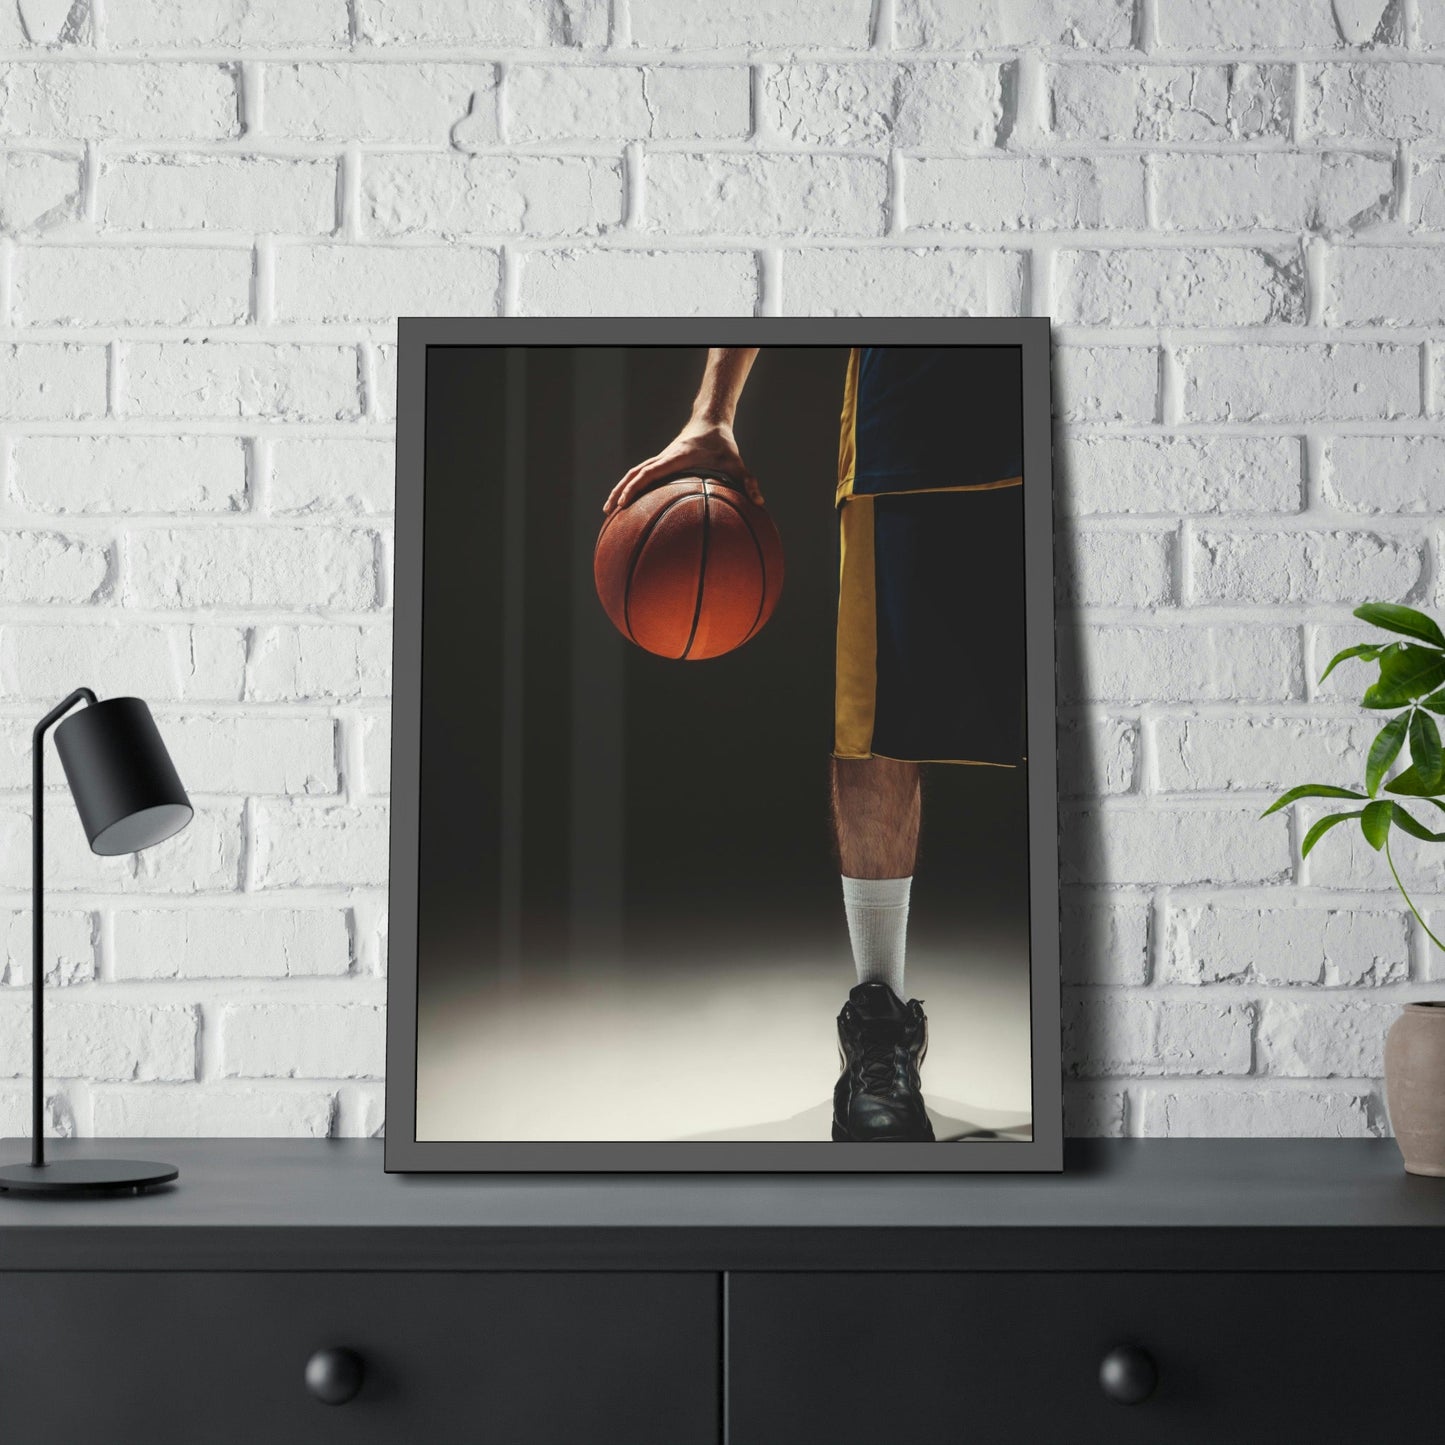 Basketball Brilliance: Print on Canvas and Framed Posters for Fans of the Sport